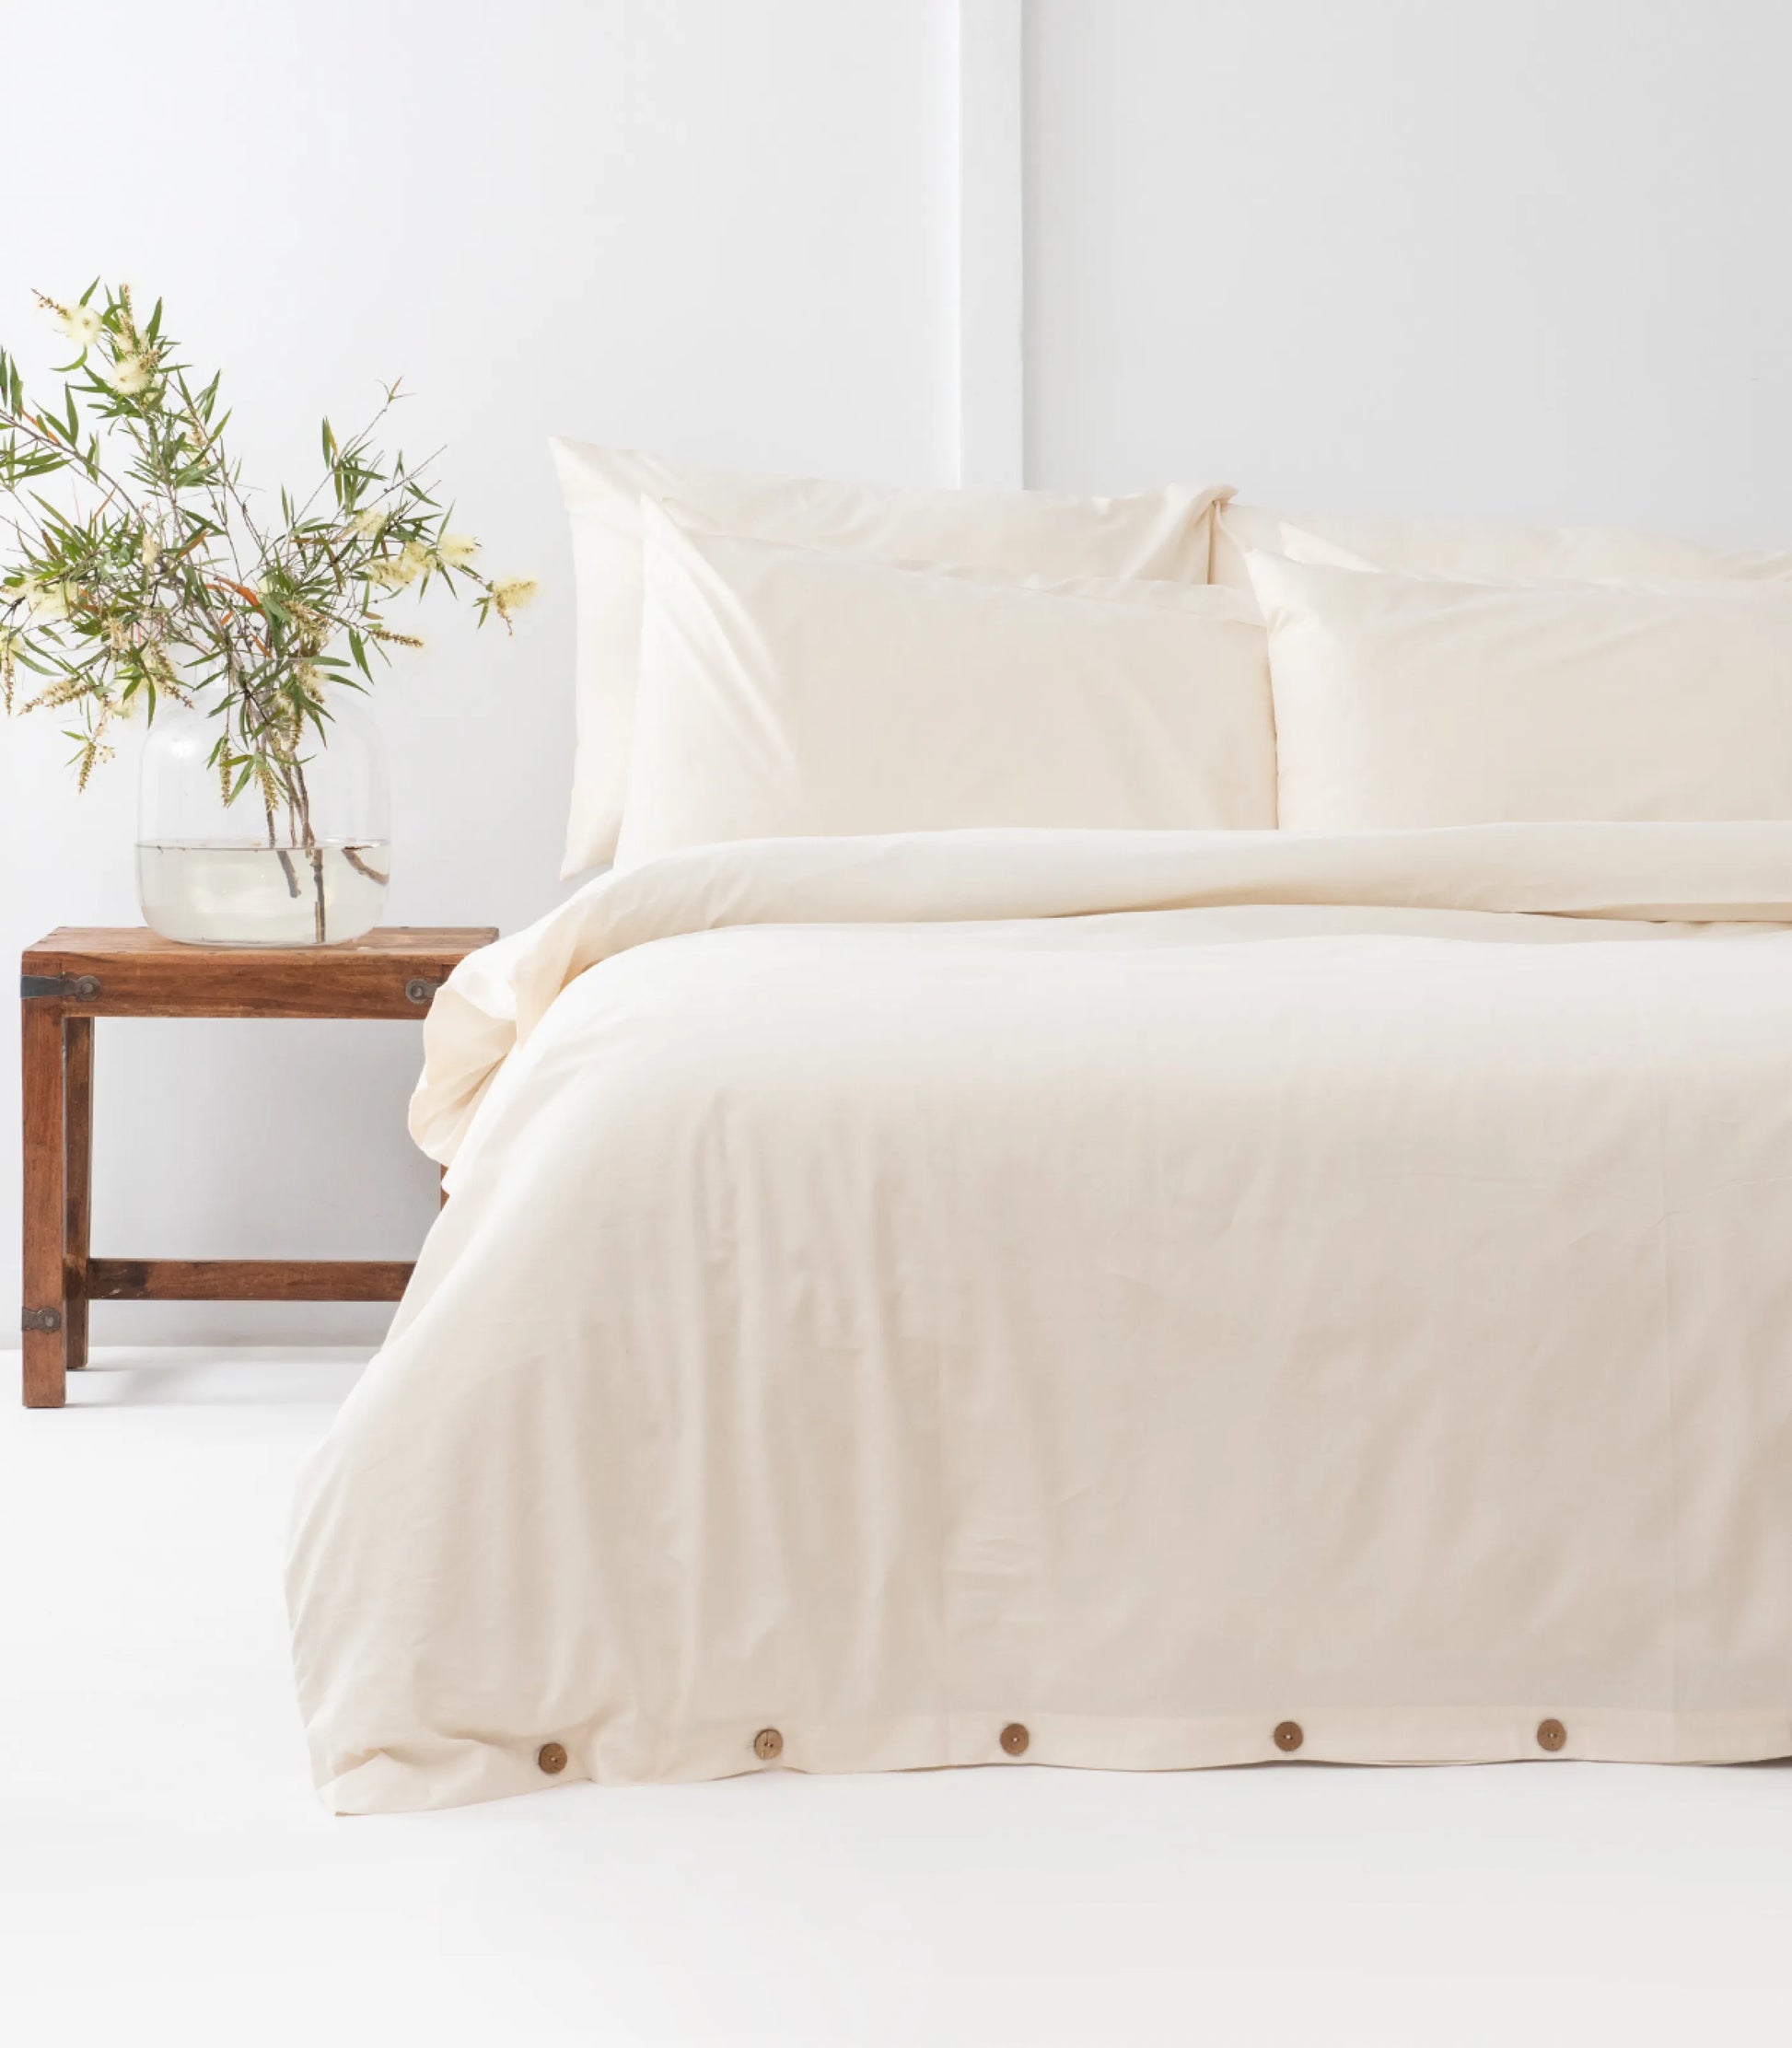 Bhumi Organic Cotton - Percale Plain Quilt Cover - Natural